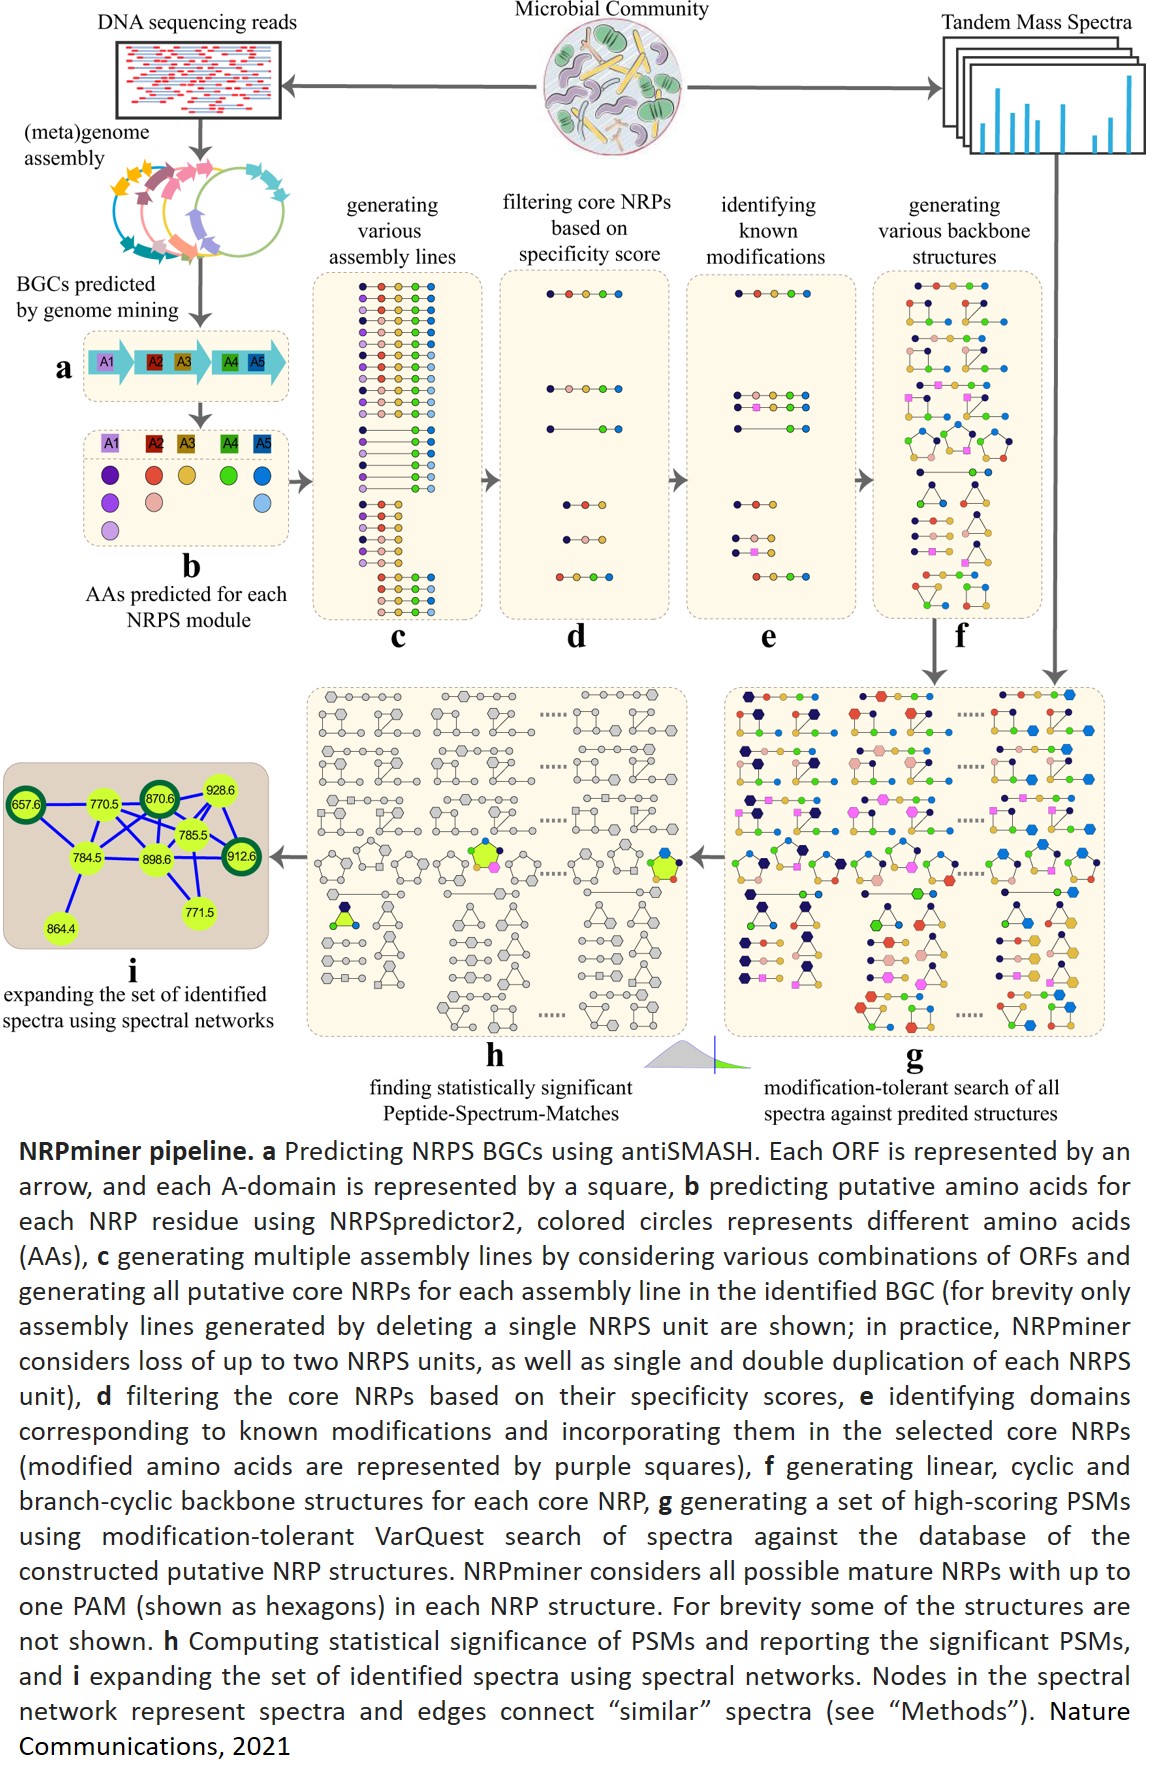 Genomics, metabolomics and machine learning to identify natural product drugs